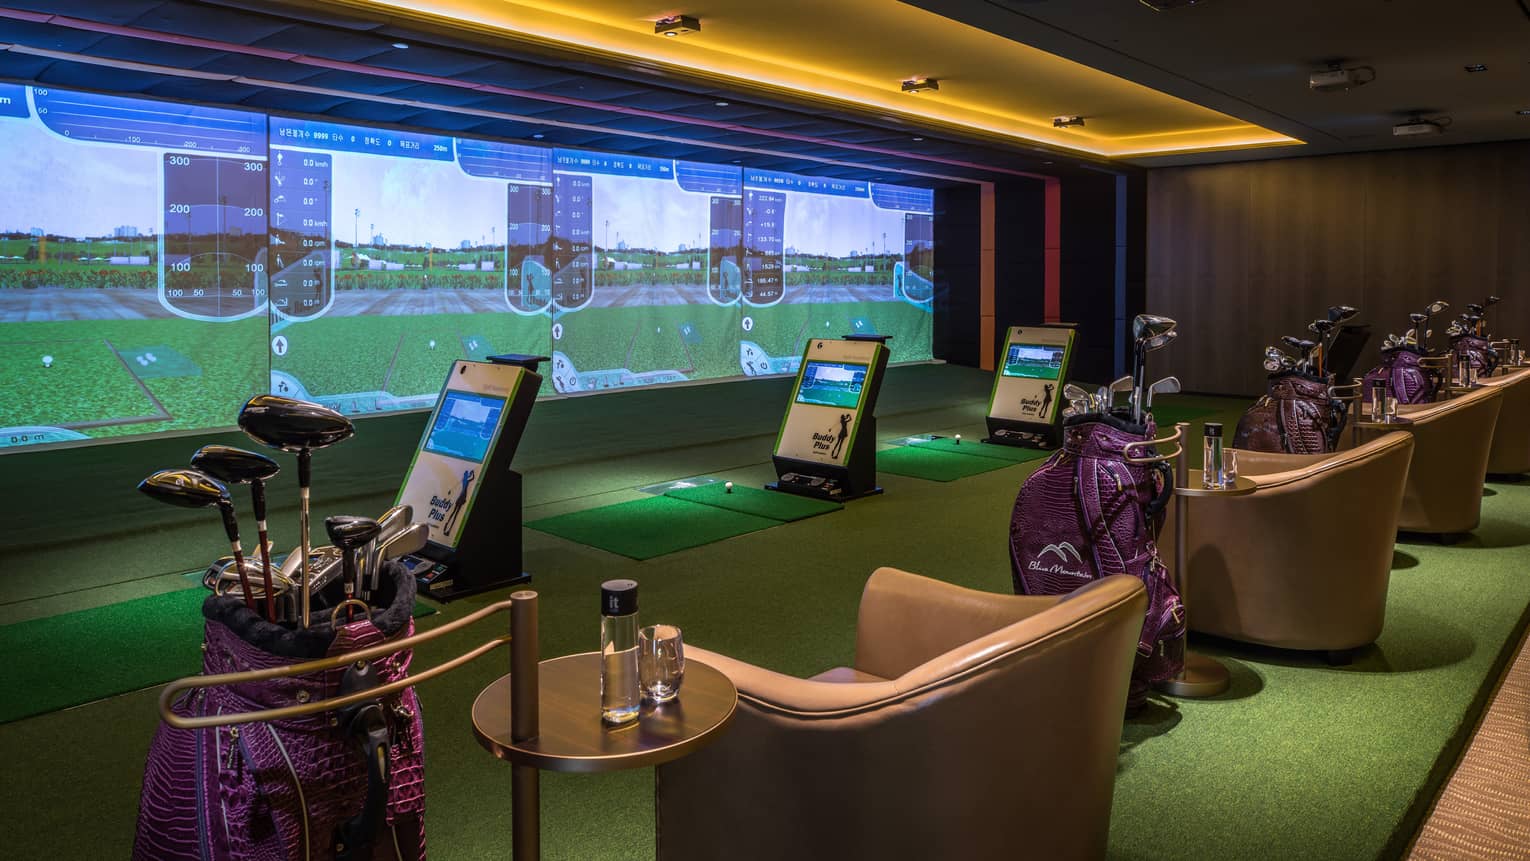 Wall with animated screens, 3D golf course game centre, armchairs with water bottles